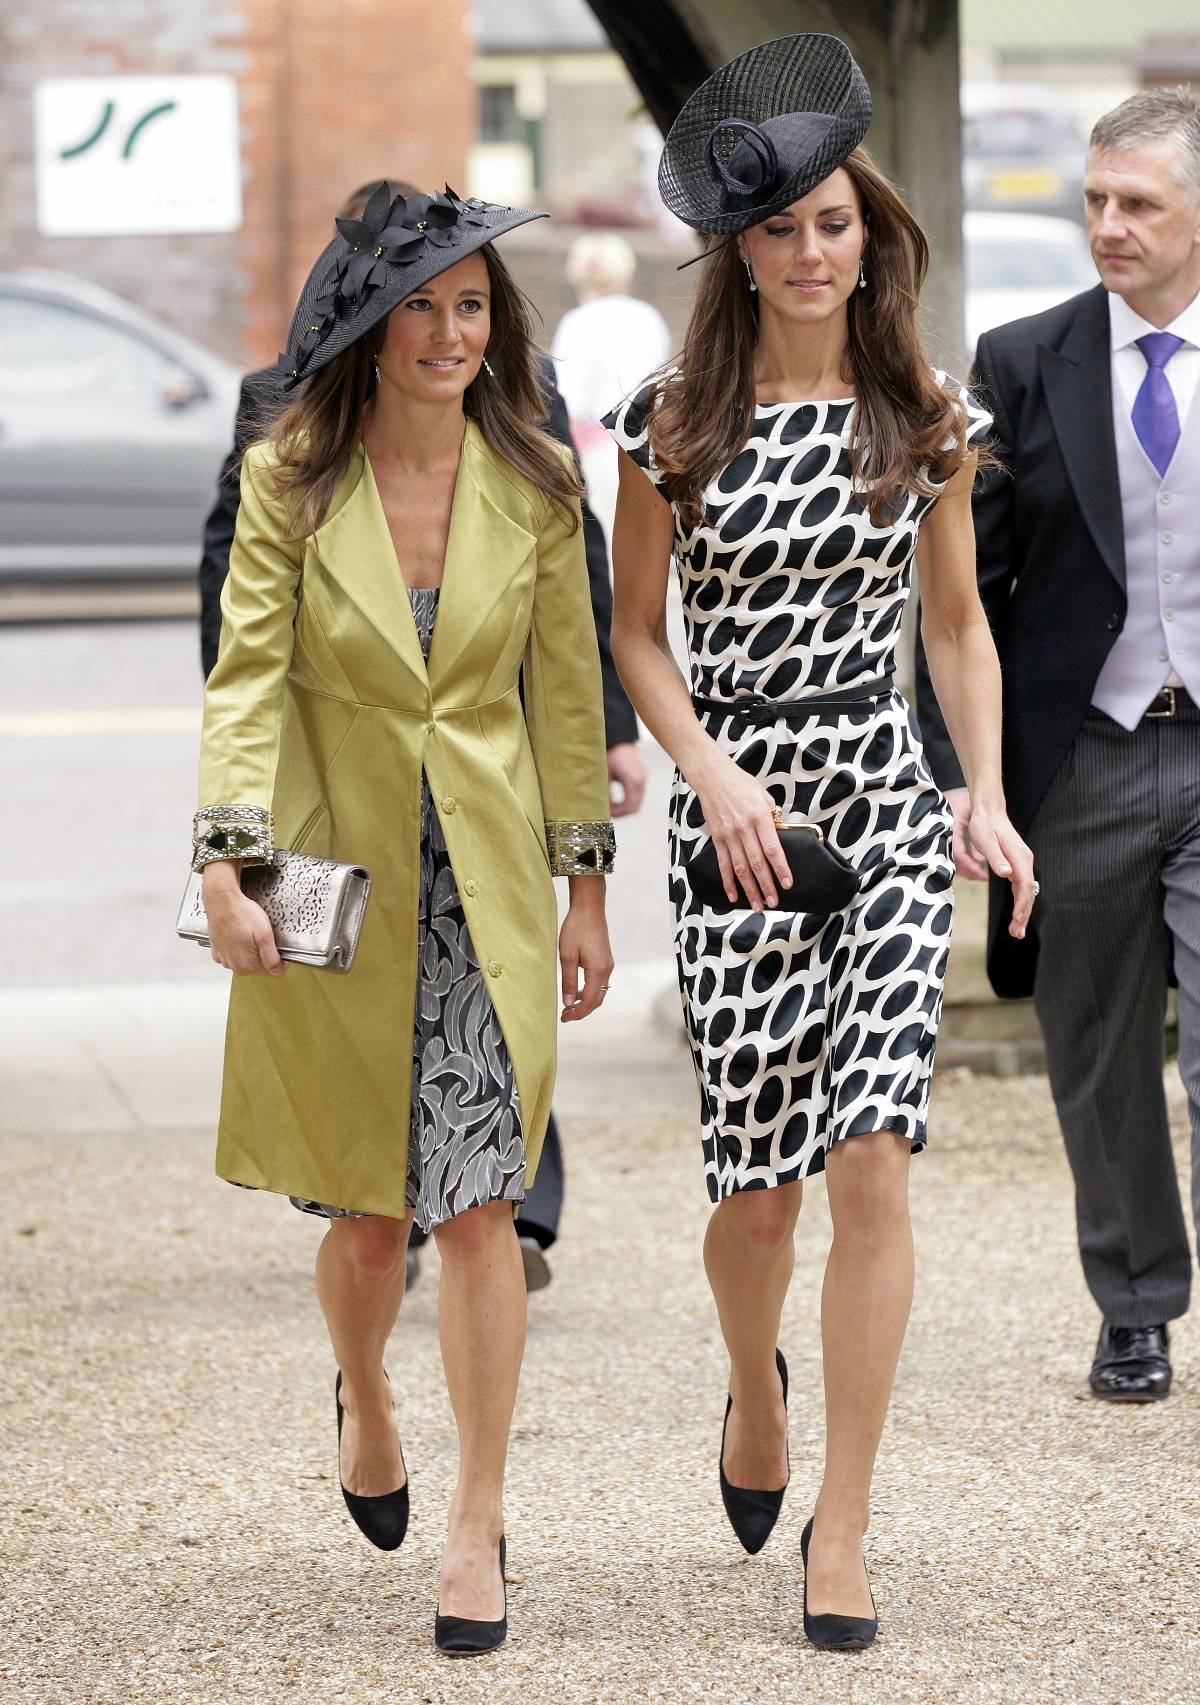 Kate Middleton and her sister, Pippa Middleton, attend the wedding of Sam Waley-Cohen and Annabel Ballin